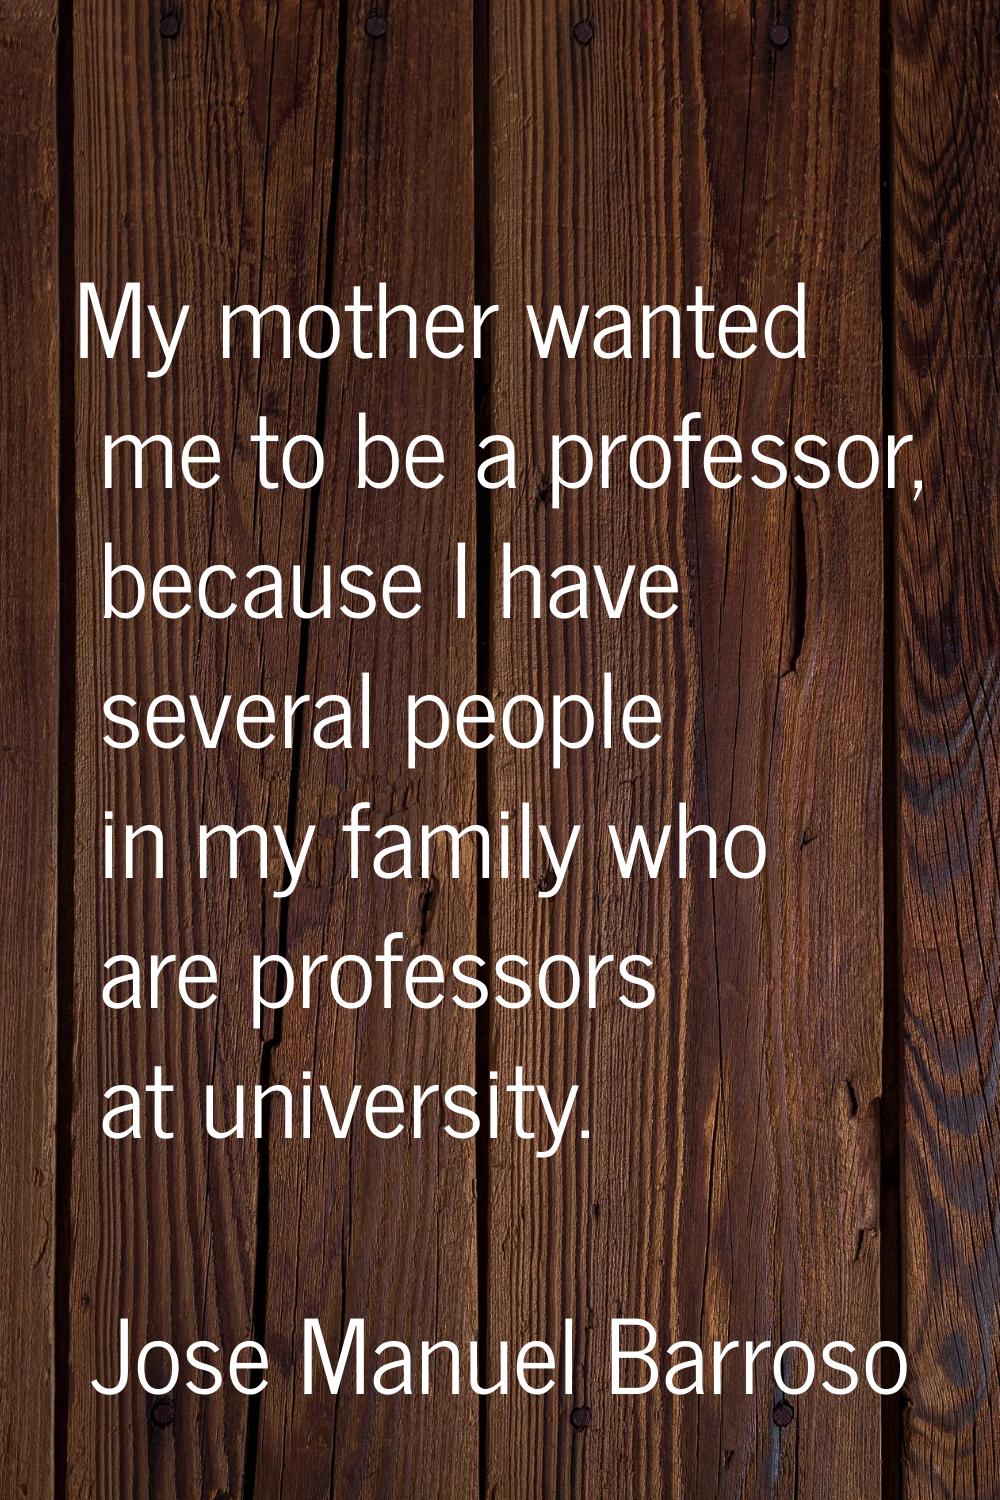 My mother wanted me to be a professor, because I have several people in my family who are professor